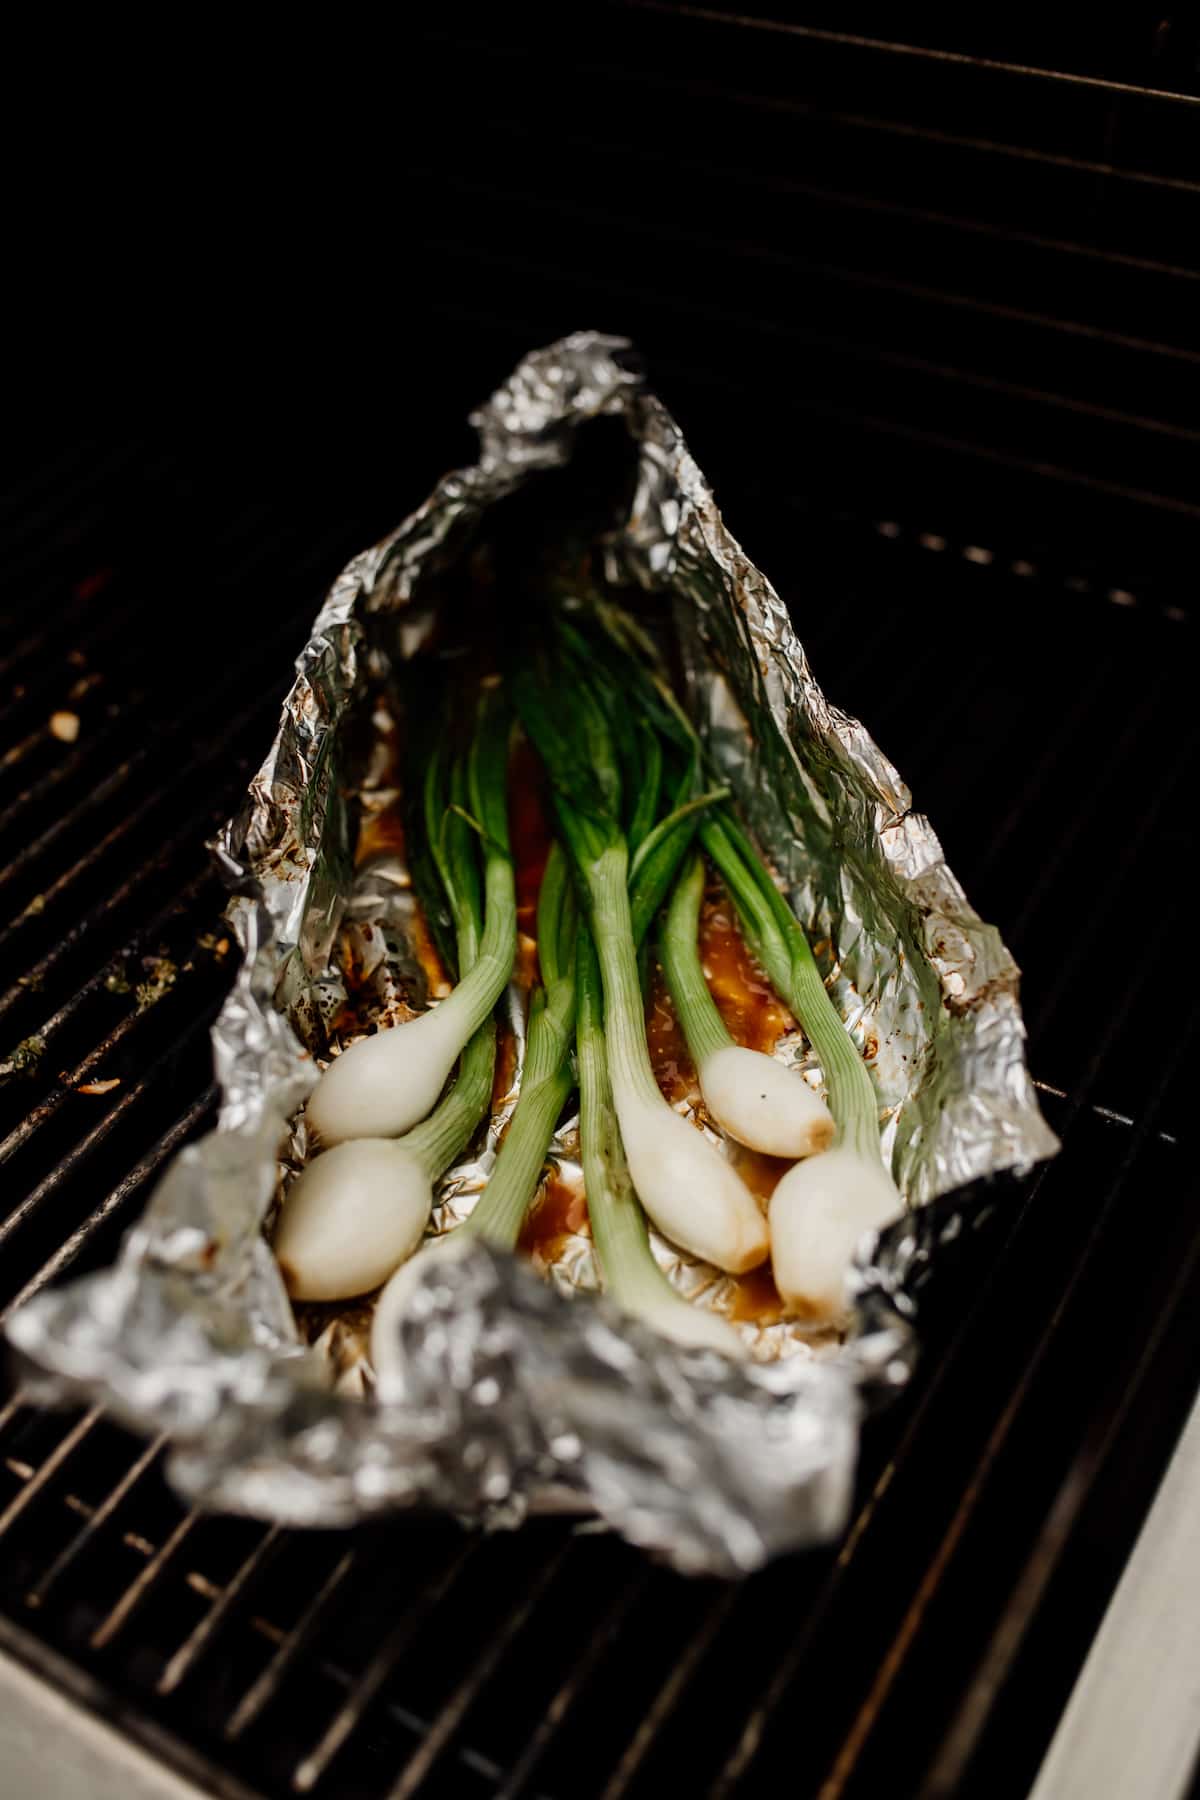 foil packet of green spring onions on the grill for making cebollitas asadas